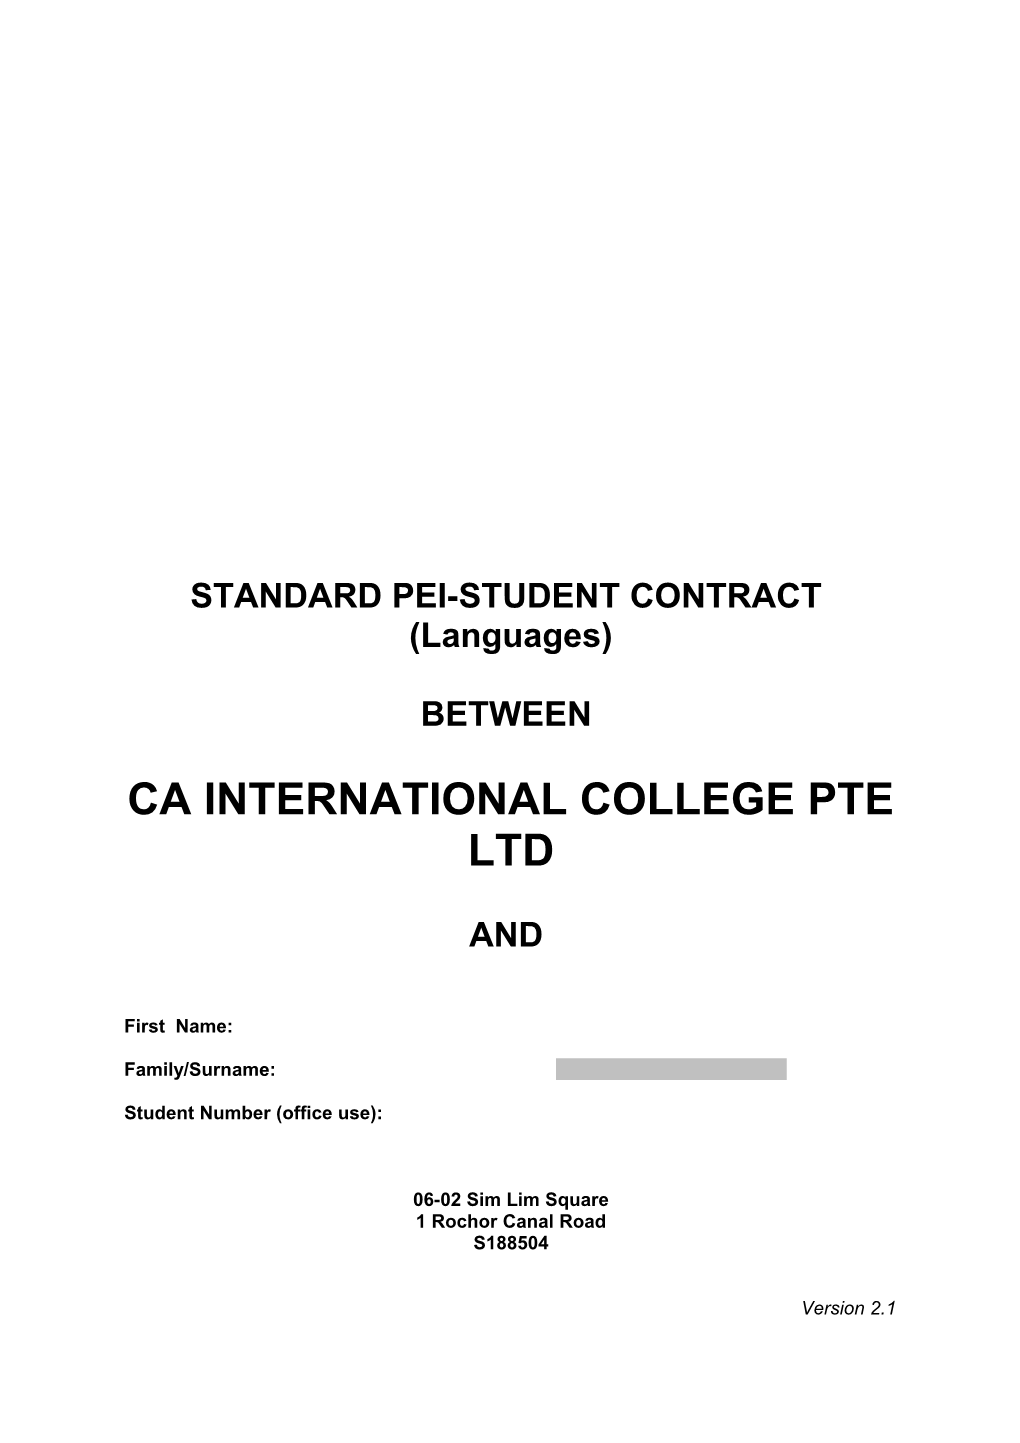 Standard Pei-Student Contract